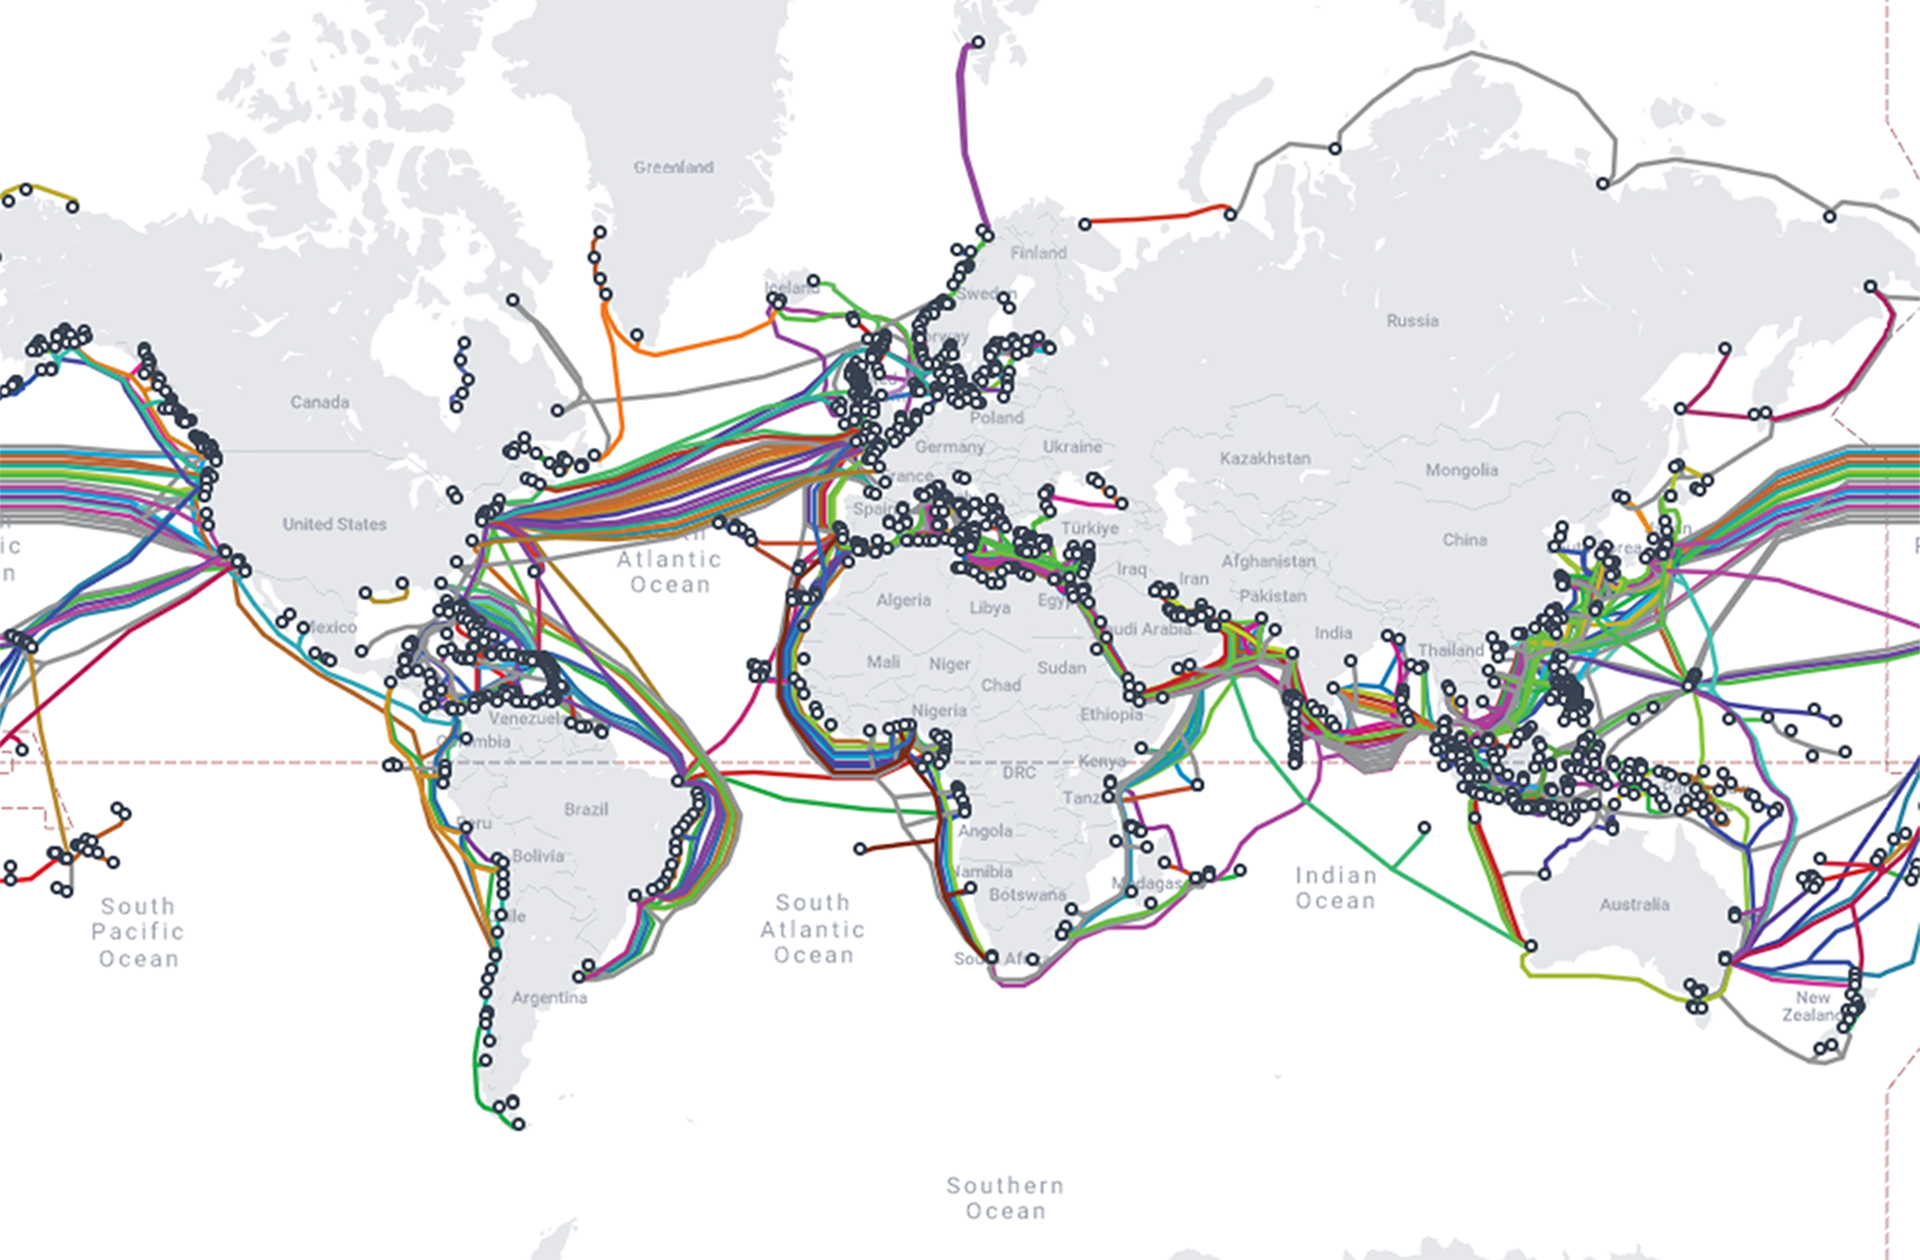 Global map of submarine cables